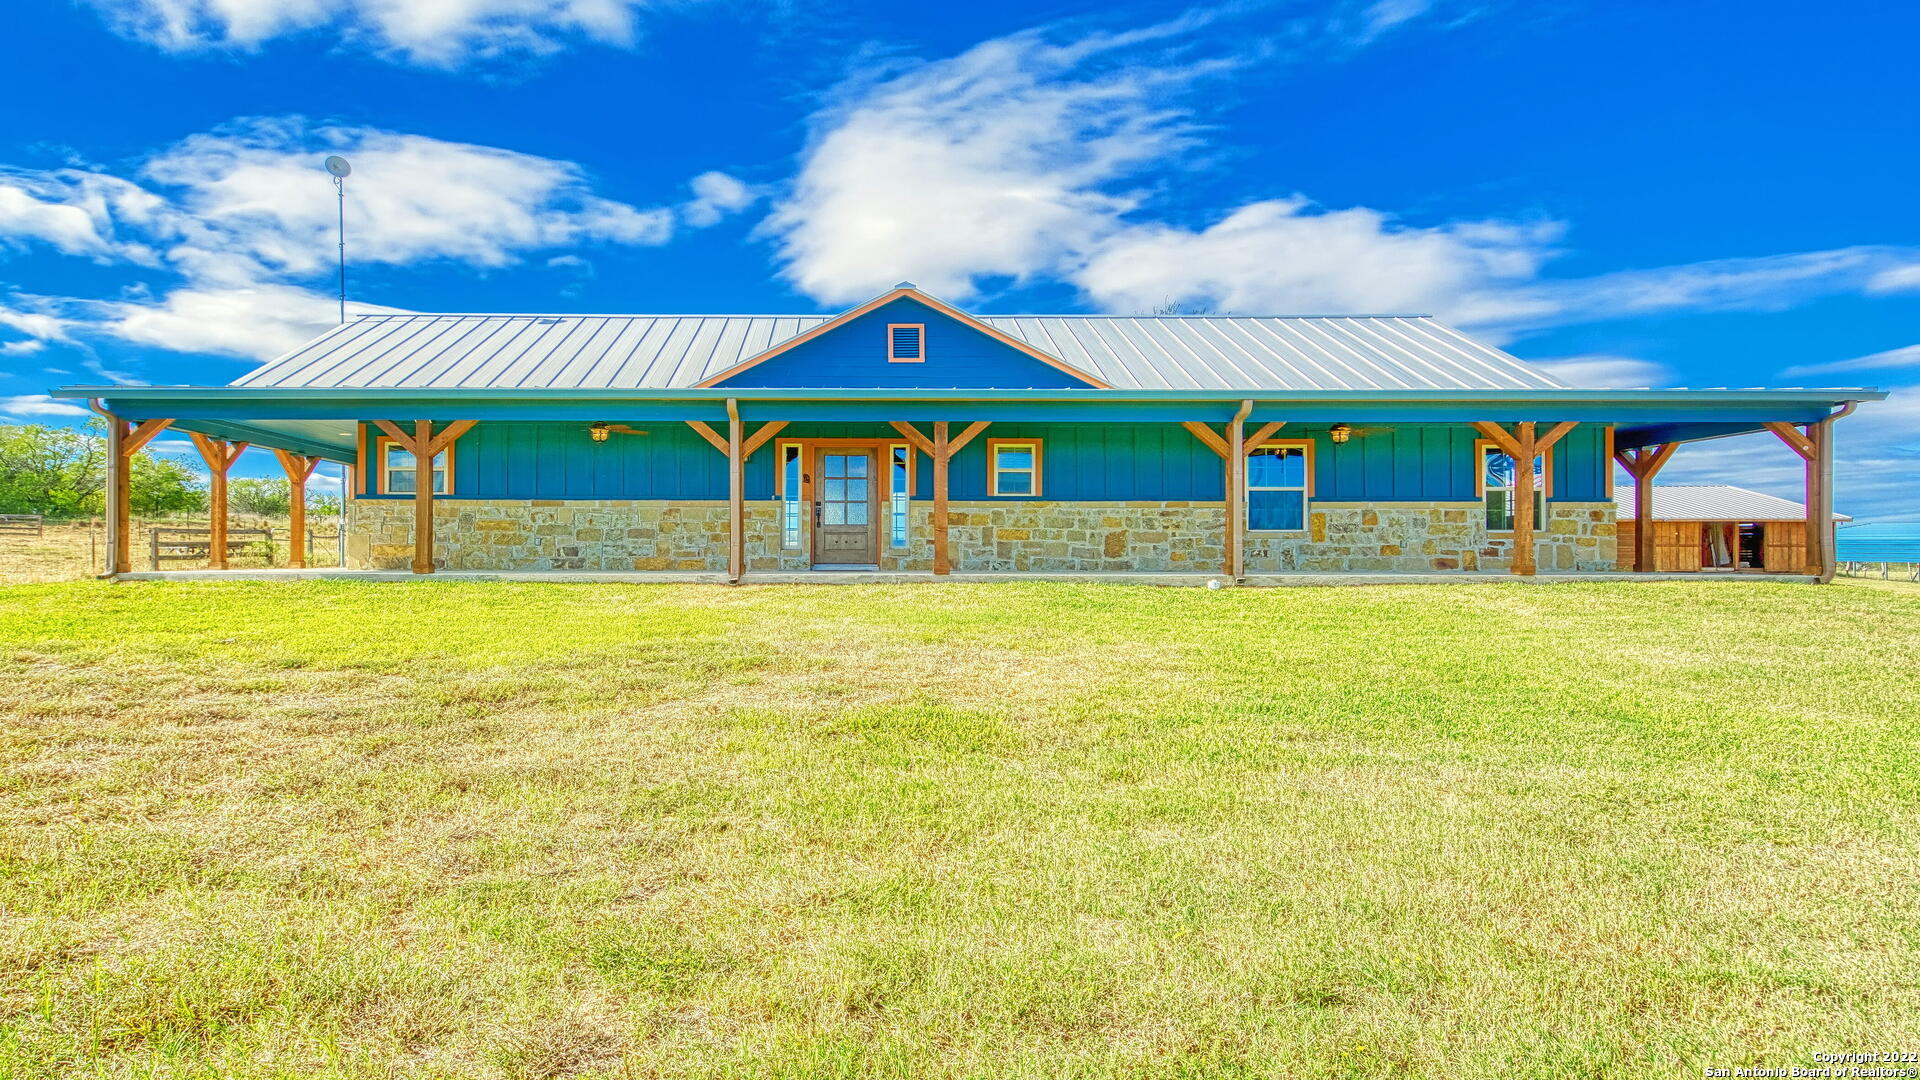 Ranch style home on 10 acres just minutes from Floresville, Stockdale, and Sutherland Springs! Built in 2019, this 2252 sq ft home has a split floor plan with an open island kitchen, living room, and dining area.  Kitchen includes corner sink, all granite counters, disposal, SS refrigerator, stove range, microwave, dishwasher, and walk in pantry that includes another small refrigerator.  Home offers a master suite that includes access to the covered back porch through a bonus area that would make a great exercise area or home office.  Master bath offers large walk in closet, large tile shower, separate his and hers vanities, and private potty room with bidet.  Located off the living room is another bonus room and the utility room which includes washer, dryer and water softener (ALL APPLIANCES ARE INCLUDED!).  Located on opposite side of the house lies the additional 2 bedrooms and full bath with tub/shower and double vanity.  Home has ceramic, wood-looking, tile floors throughout.  Did I mention the home has a porch that wraps around 3/4 of the home!  Got horses? This property has a large horse barn (35X71) with 5 stalls and room for more!  Also has additional storage building (12X12), carport (20X24), and a foaling shed (12X24).  Property is fenced and crossed fenced.  Property includes 2 septic systems, 2 electric meters, and 2 water meters. COUNTRY LIVING AT ITS BEST!! CALL TODAY!